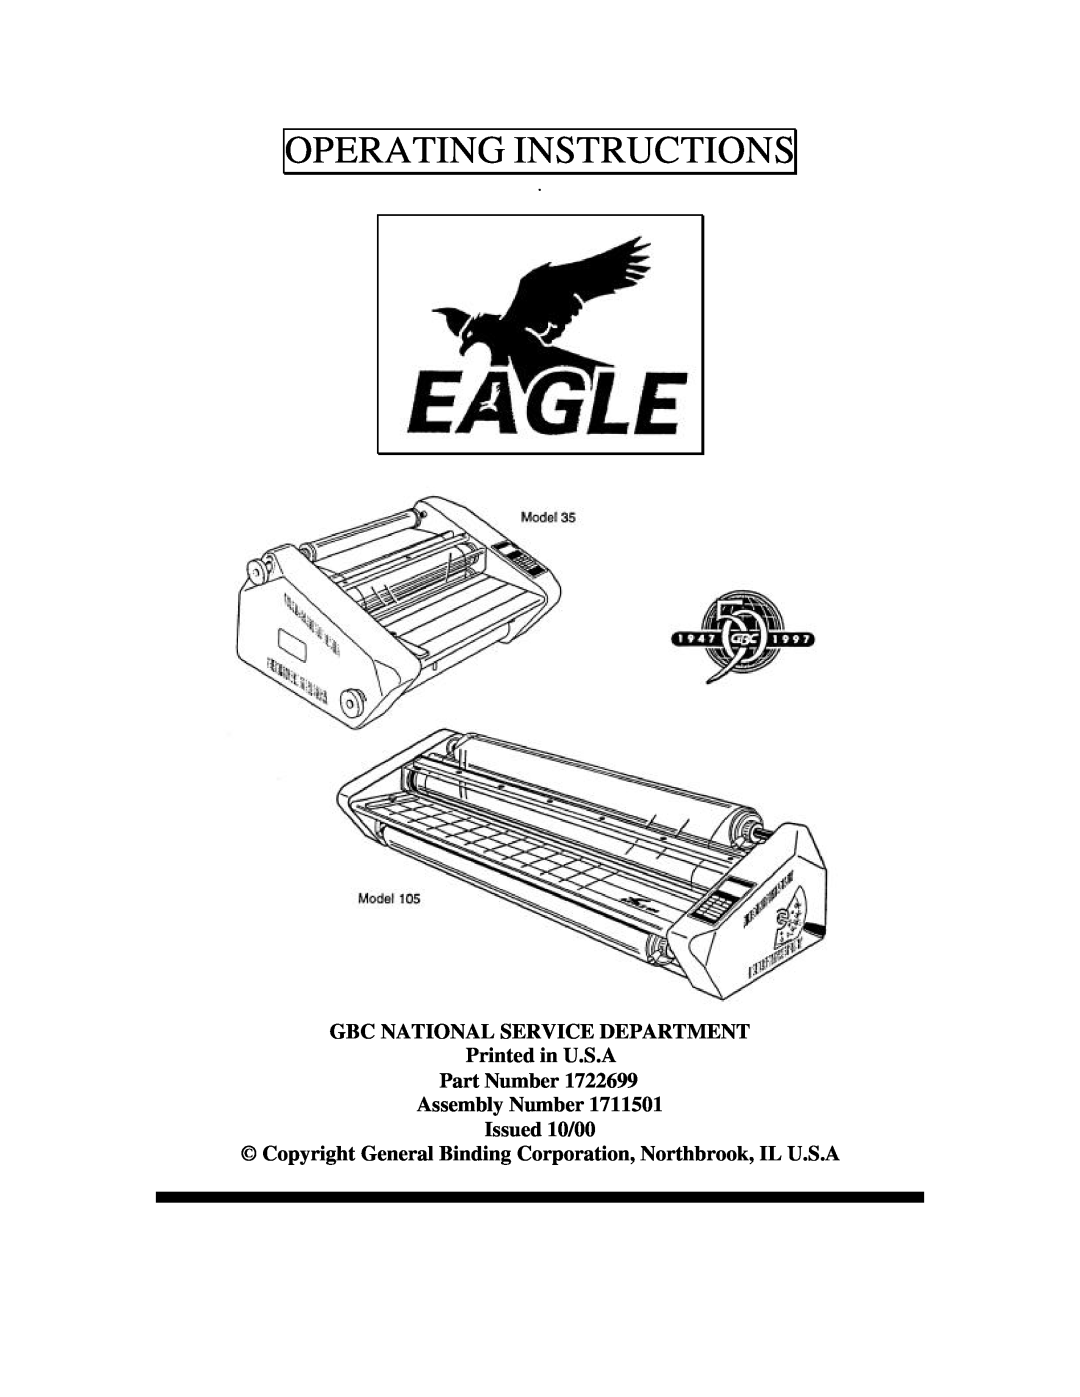 Eagle Electronics 105, 35 manual Operating Instructions, GBC NATIONAL SERVICE DEPARTMENT Printed in U.S.A Part Number 